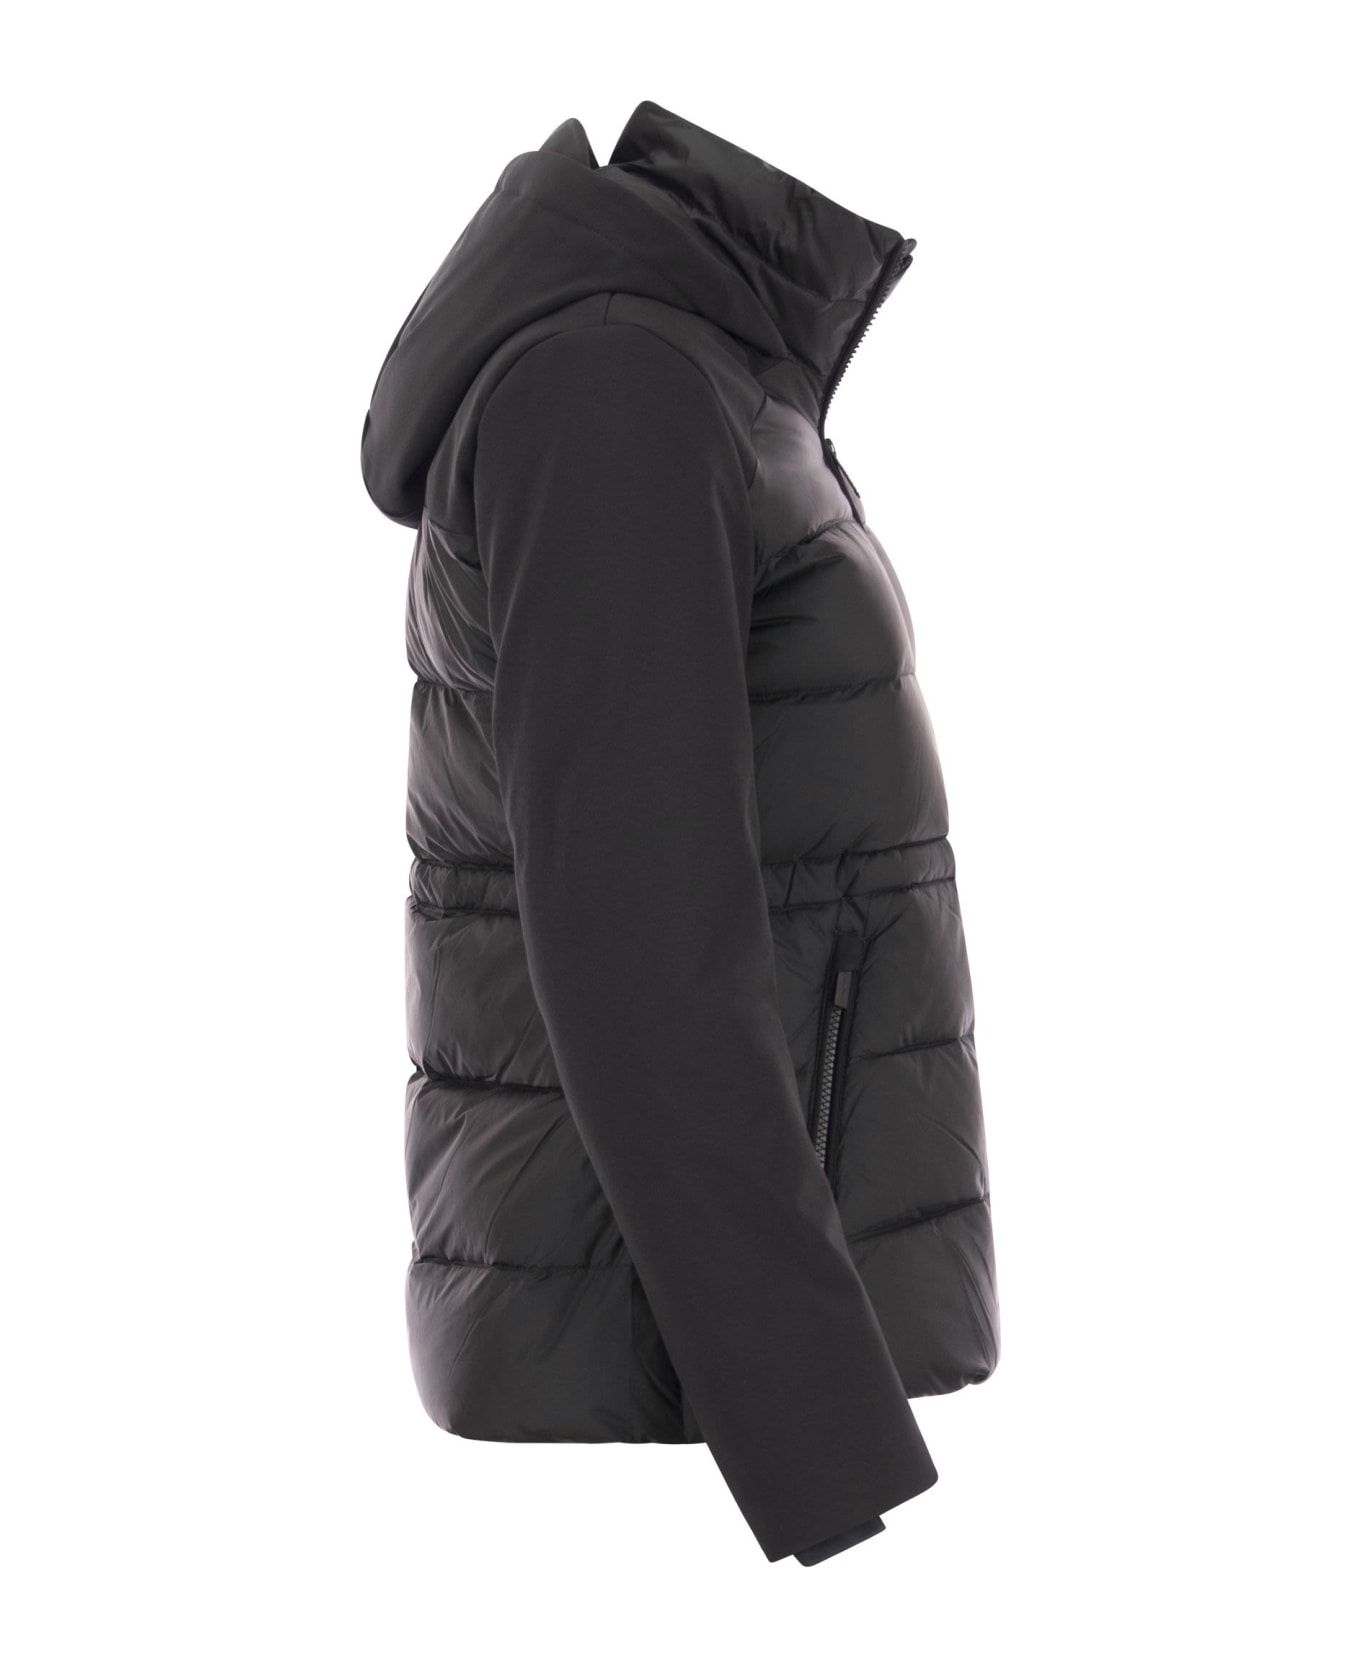 Woolrich Quilted Down Jacket With Hood - Black